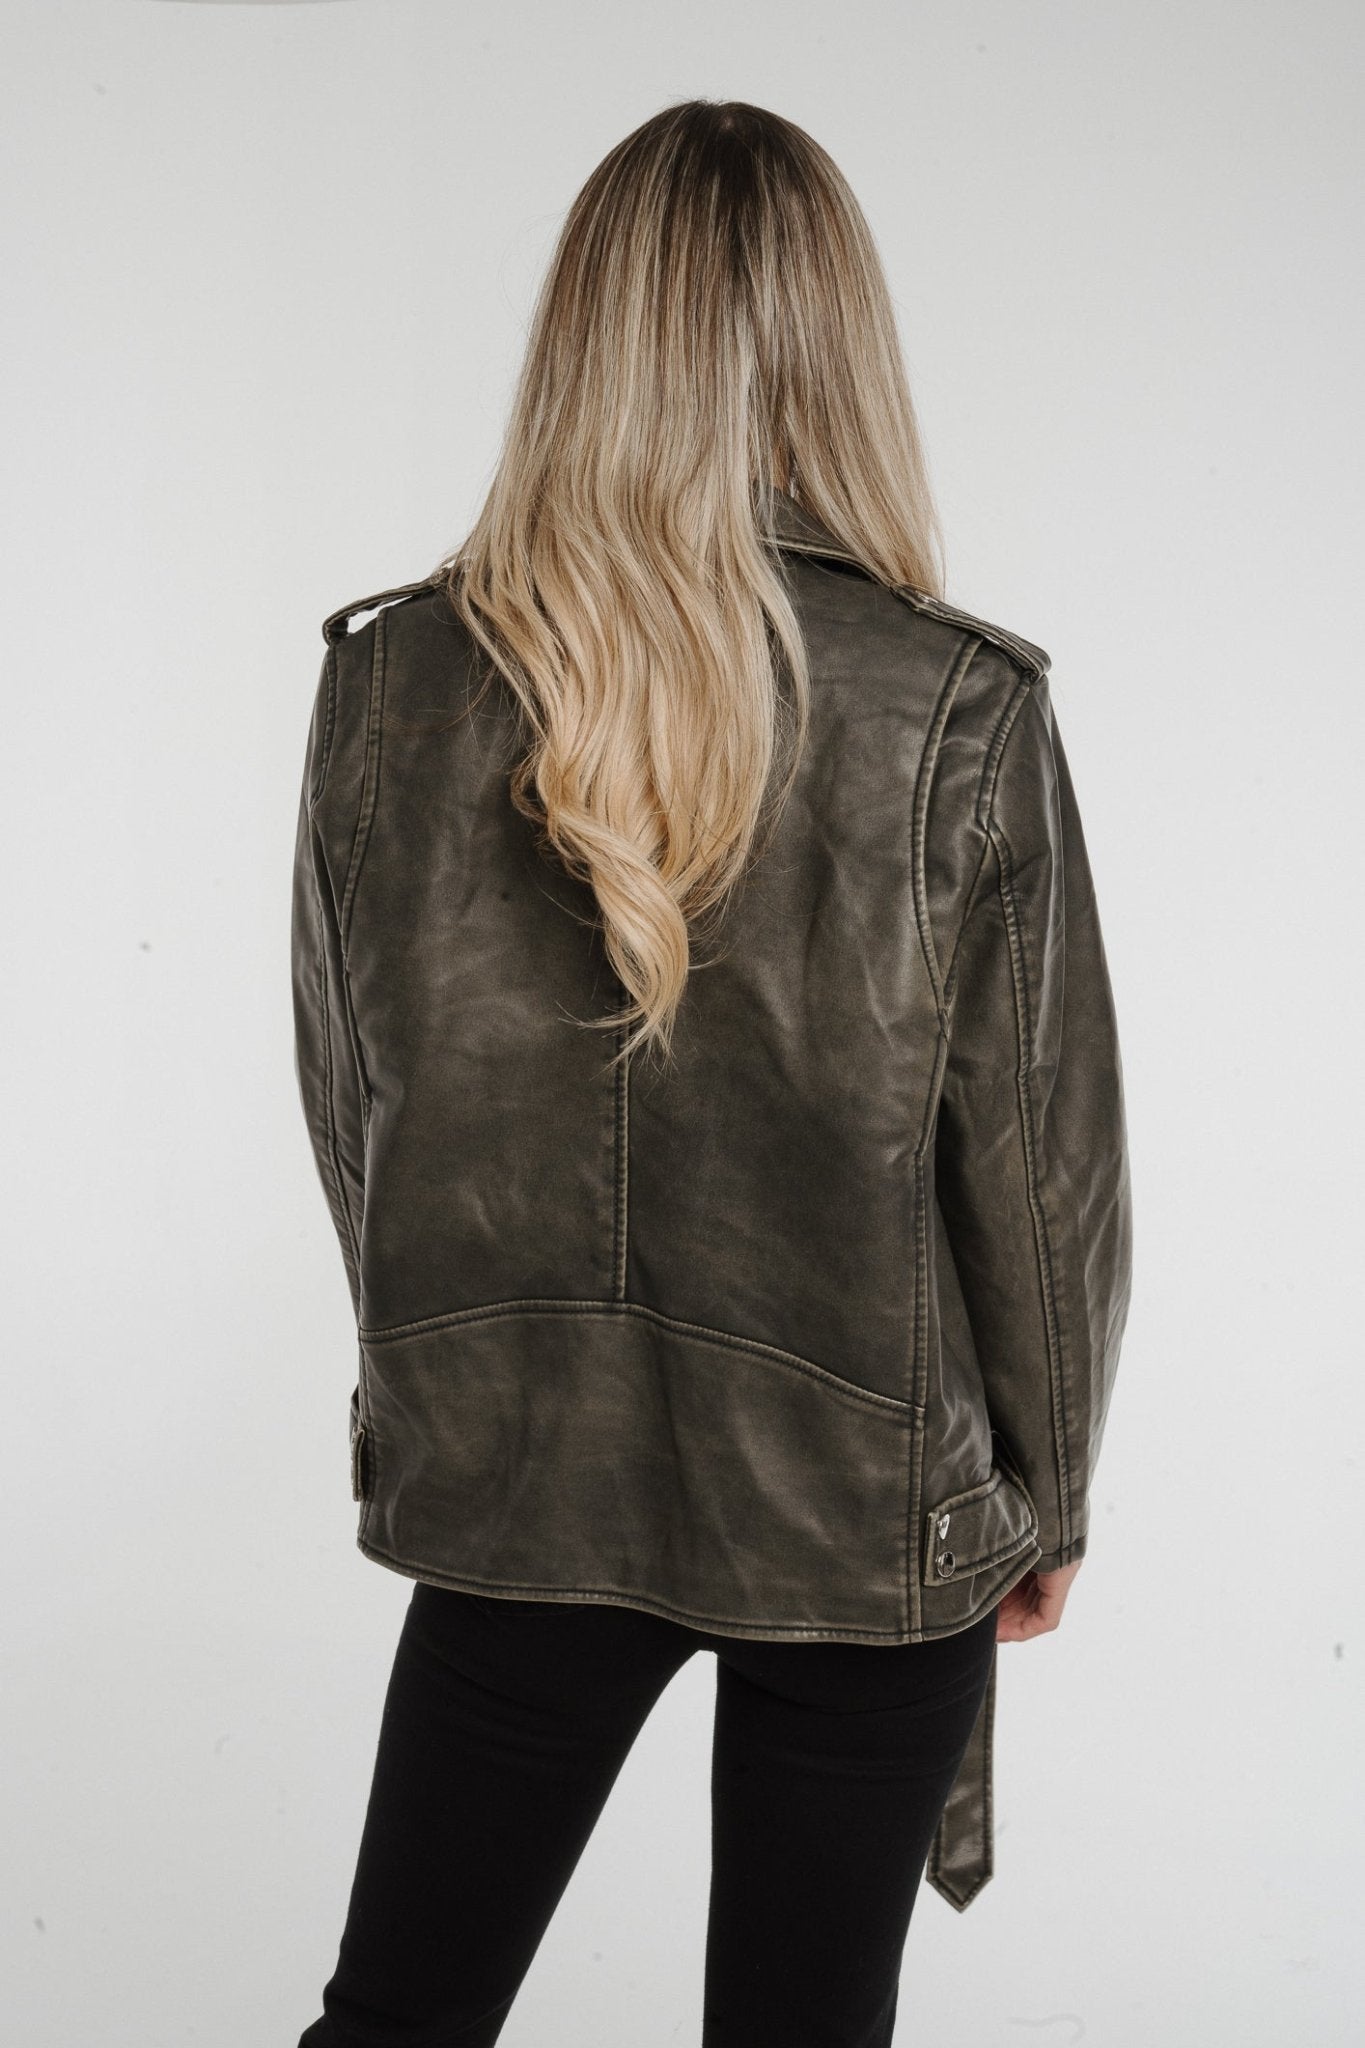 Caitlyn Oversized Distressed Leather Jacket In Green - The Walk in Wardrobe